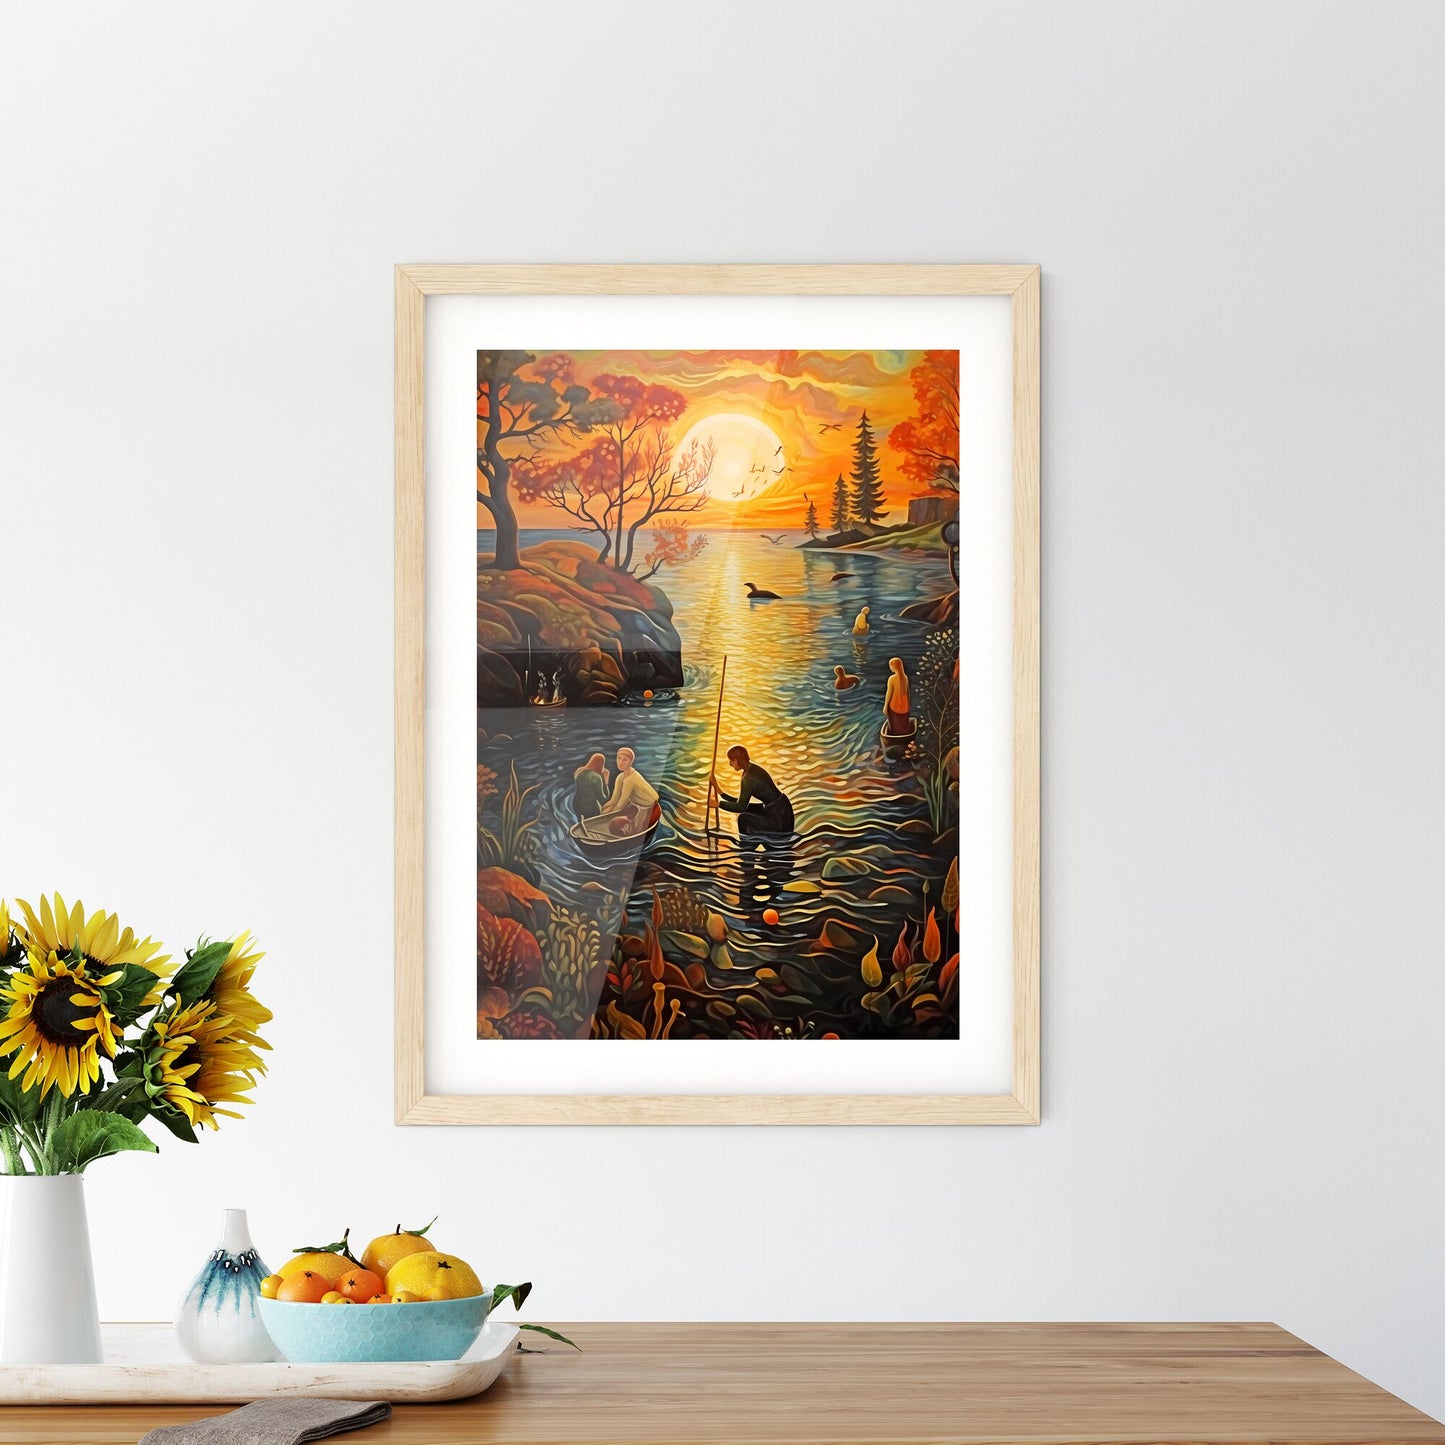 Baltic Sea Bath Scene In Autumn - A Painting Of People Fishing In A Lake Default Title